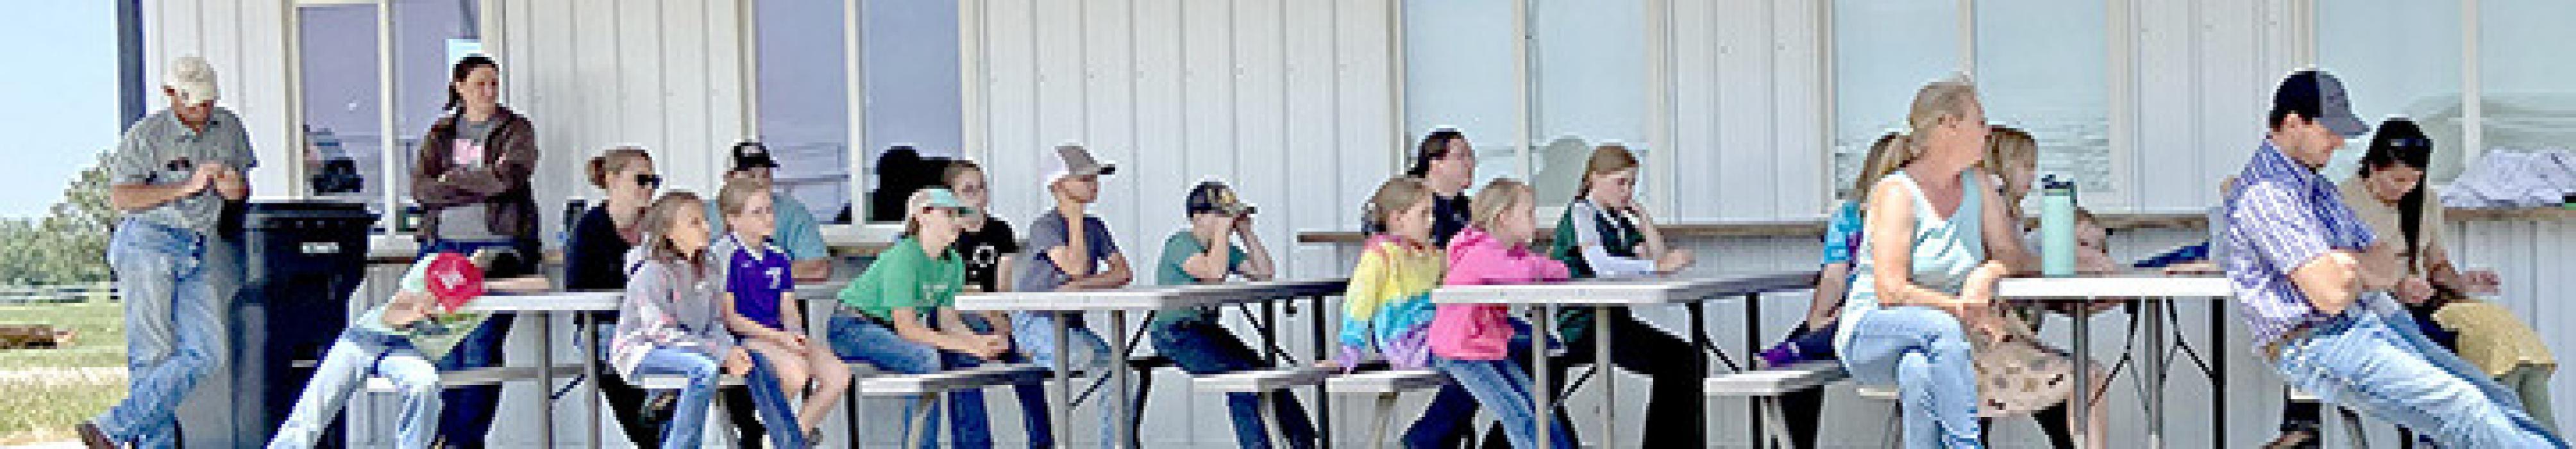 On Tuesday, June 13th, Gregory County 4-H also held an All About Horses workshop led by Mollie Andrews. Youth learned lots of things about horses including different breeds, anatomy of a horse, conformation, and the tack used in grooming and riding. The youth also learned the parts of a saddle and the correct way to catch and tie their horse.